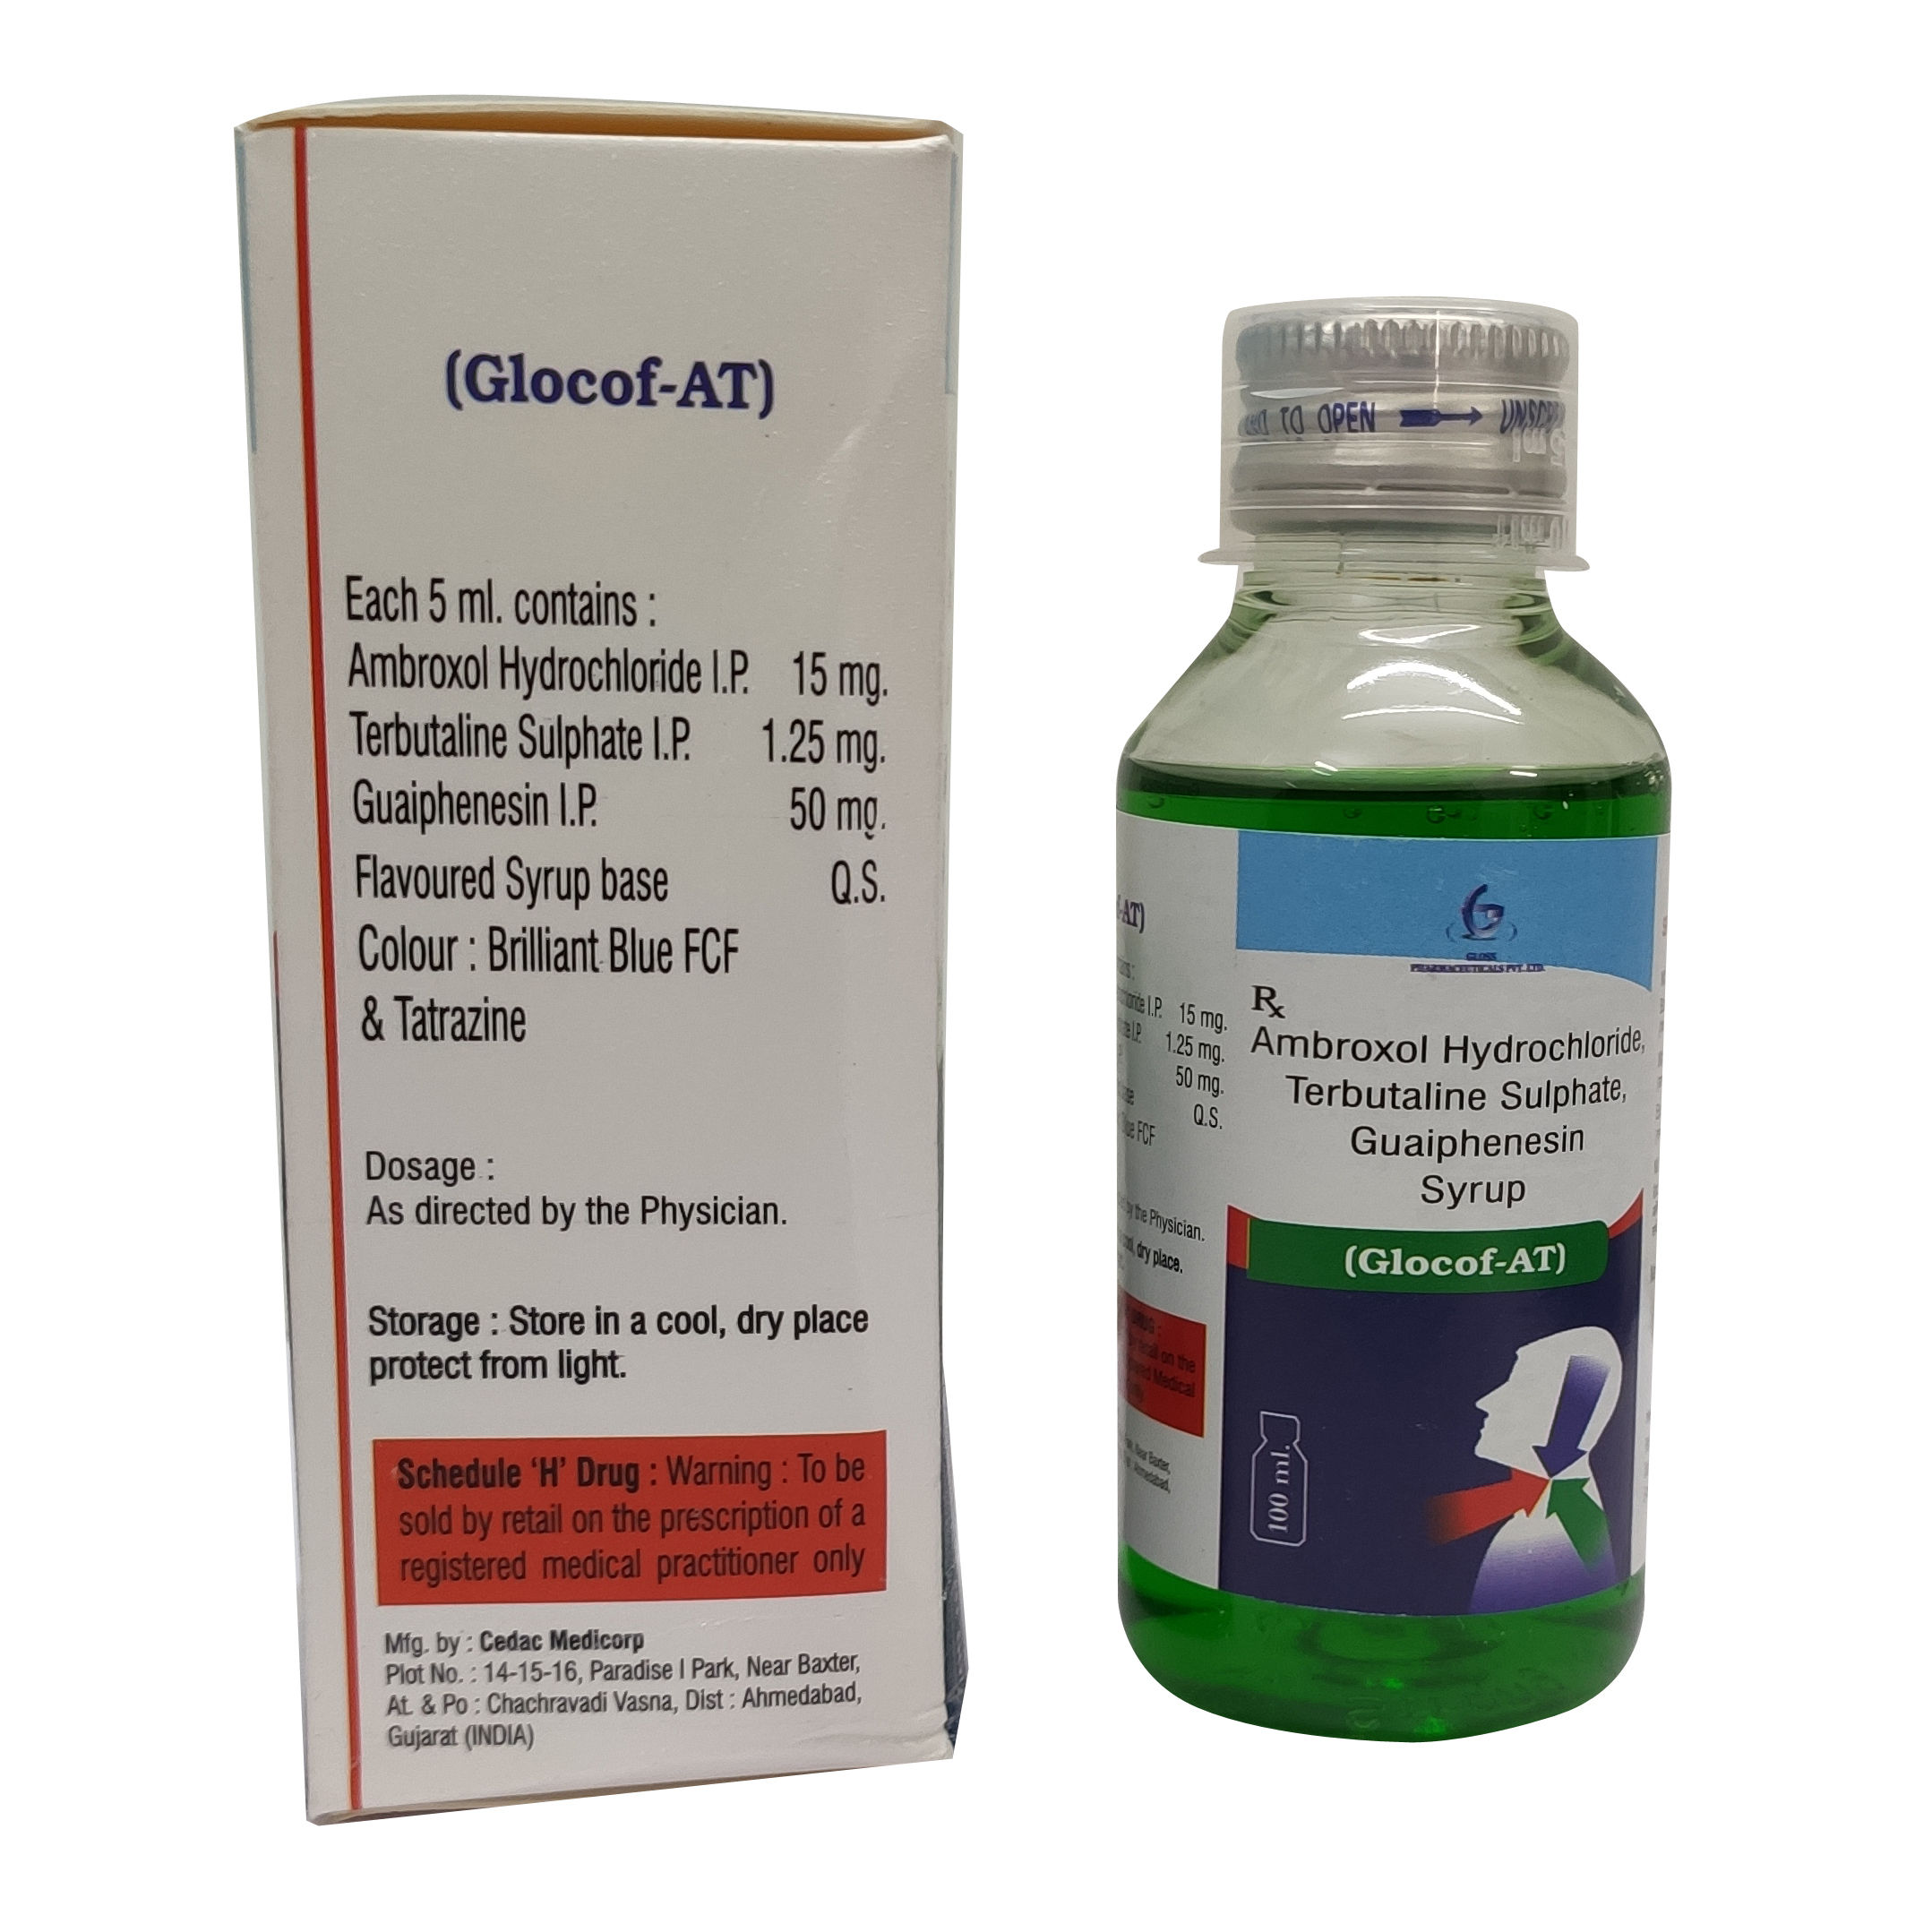 Glocof AT- Ambroxol Hydrochloride,Terbutaline Sulphate Syrup